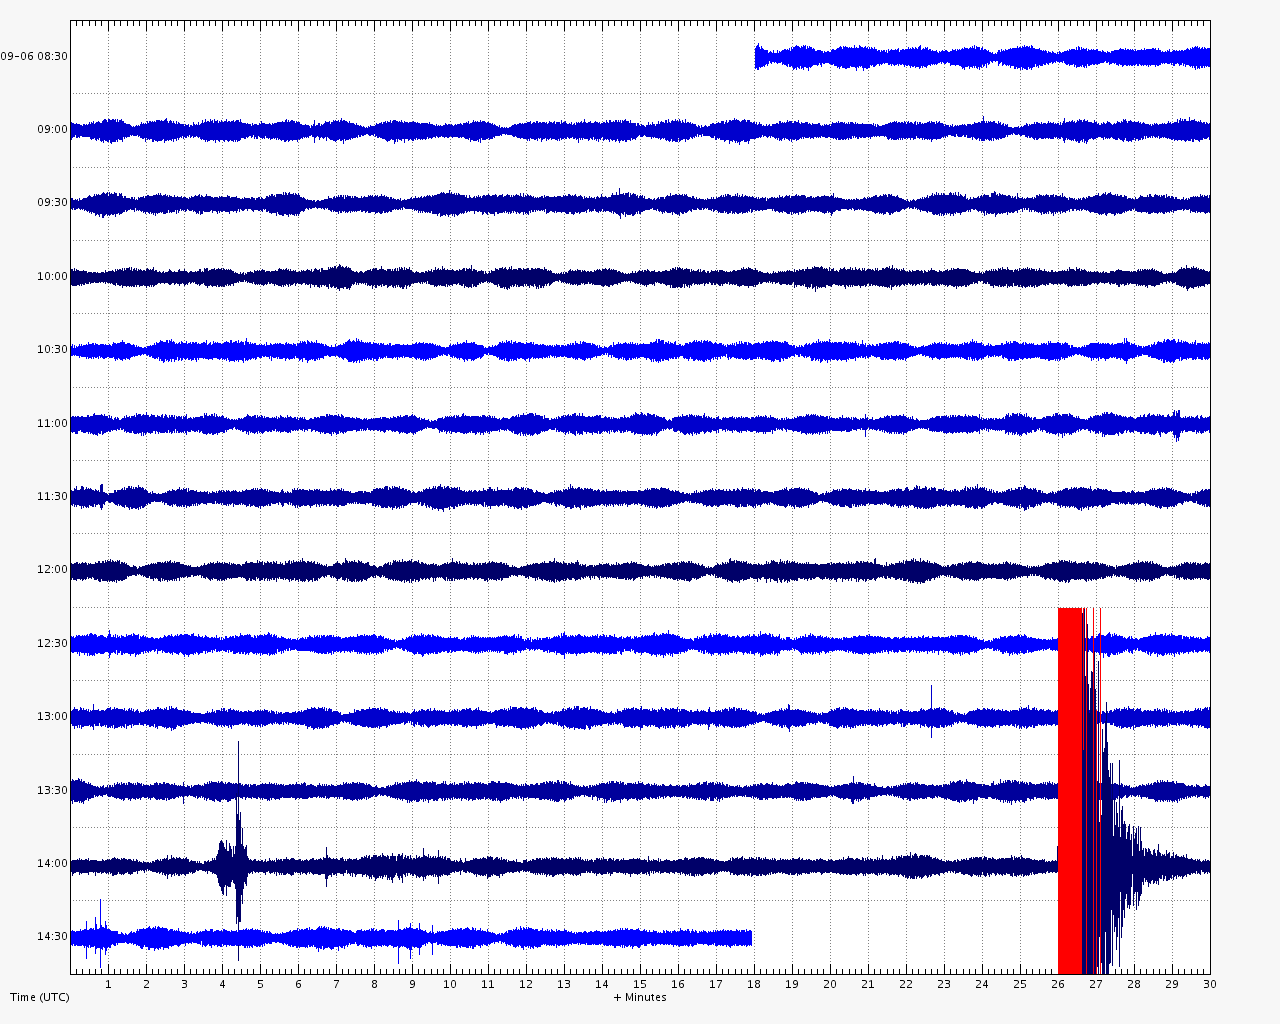 Earthquake trace on the recording of MLOA station (HVO)